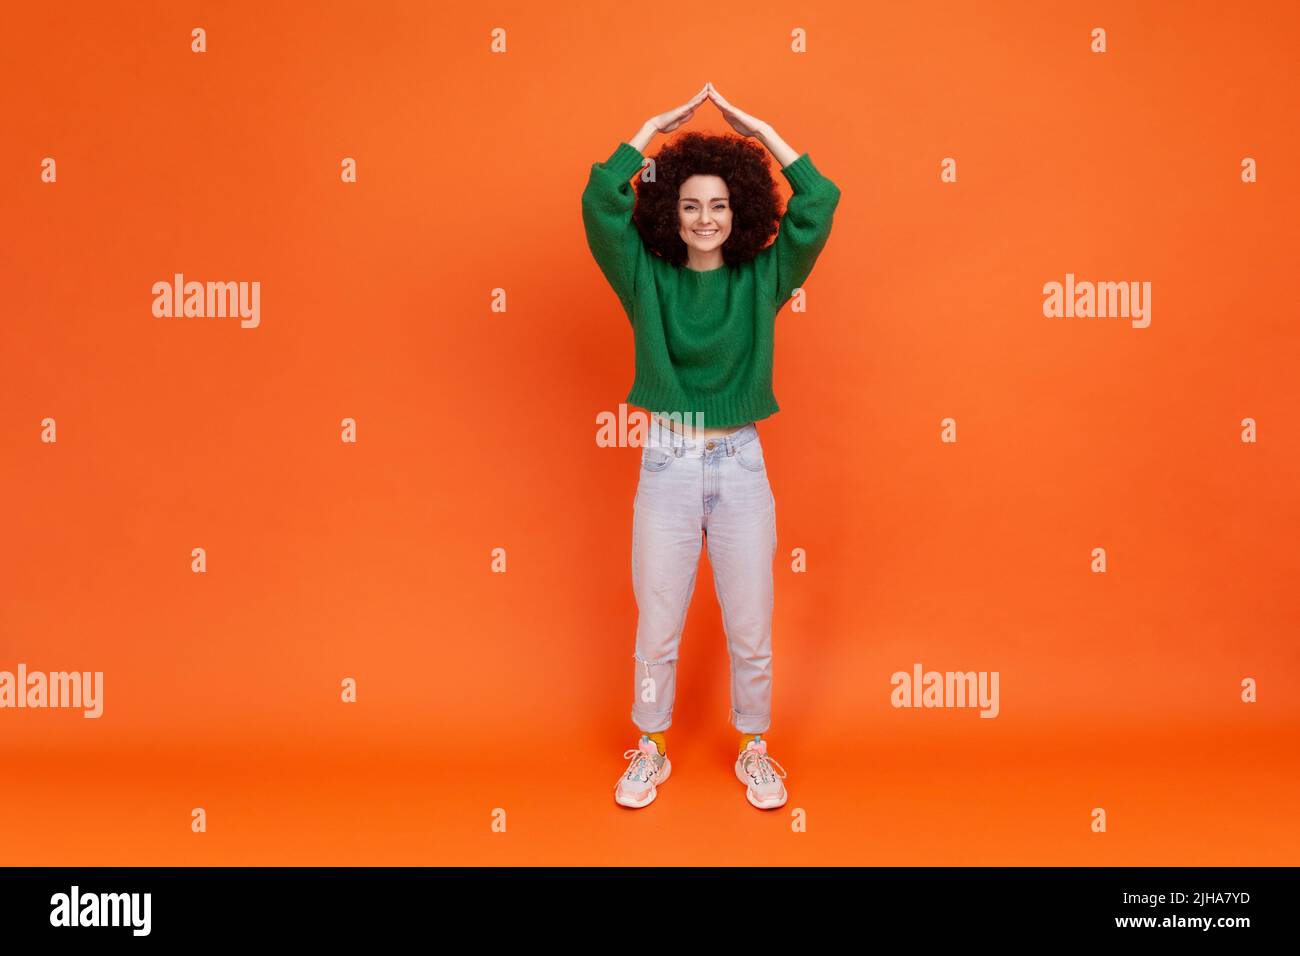 Full length portrait of woman with Afro hairstyle wearing green casual style sweater holding arms above head making roof gesture, insurance. Indoor studio shot isolated on orange background. Stock Photo